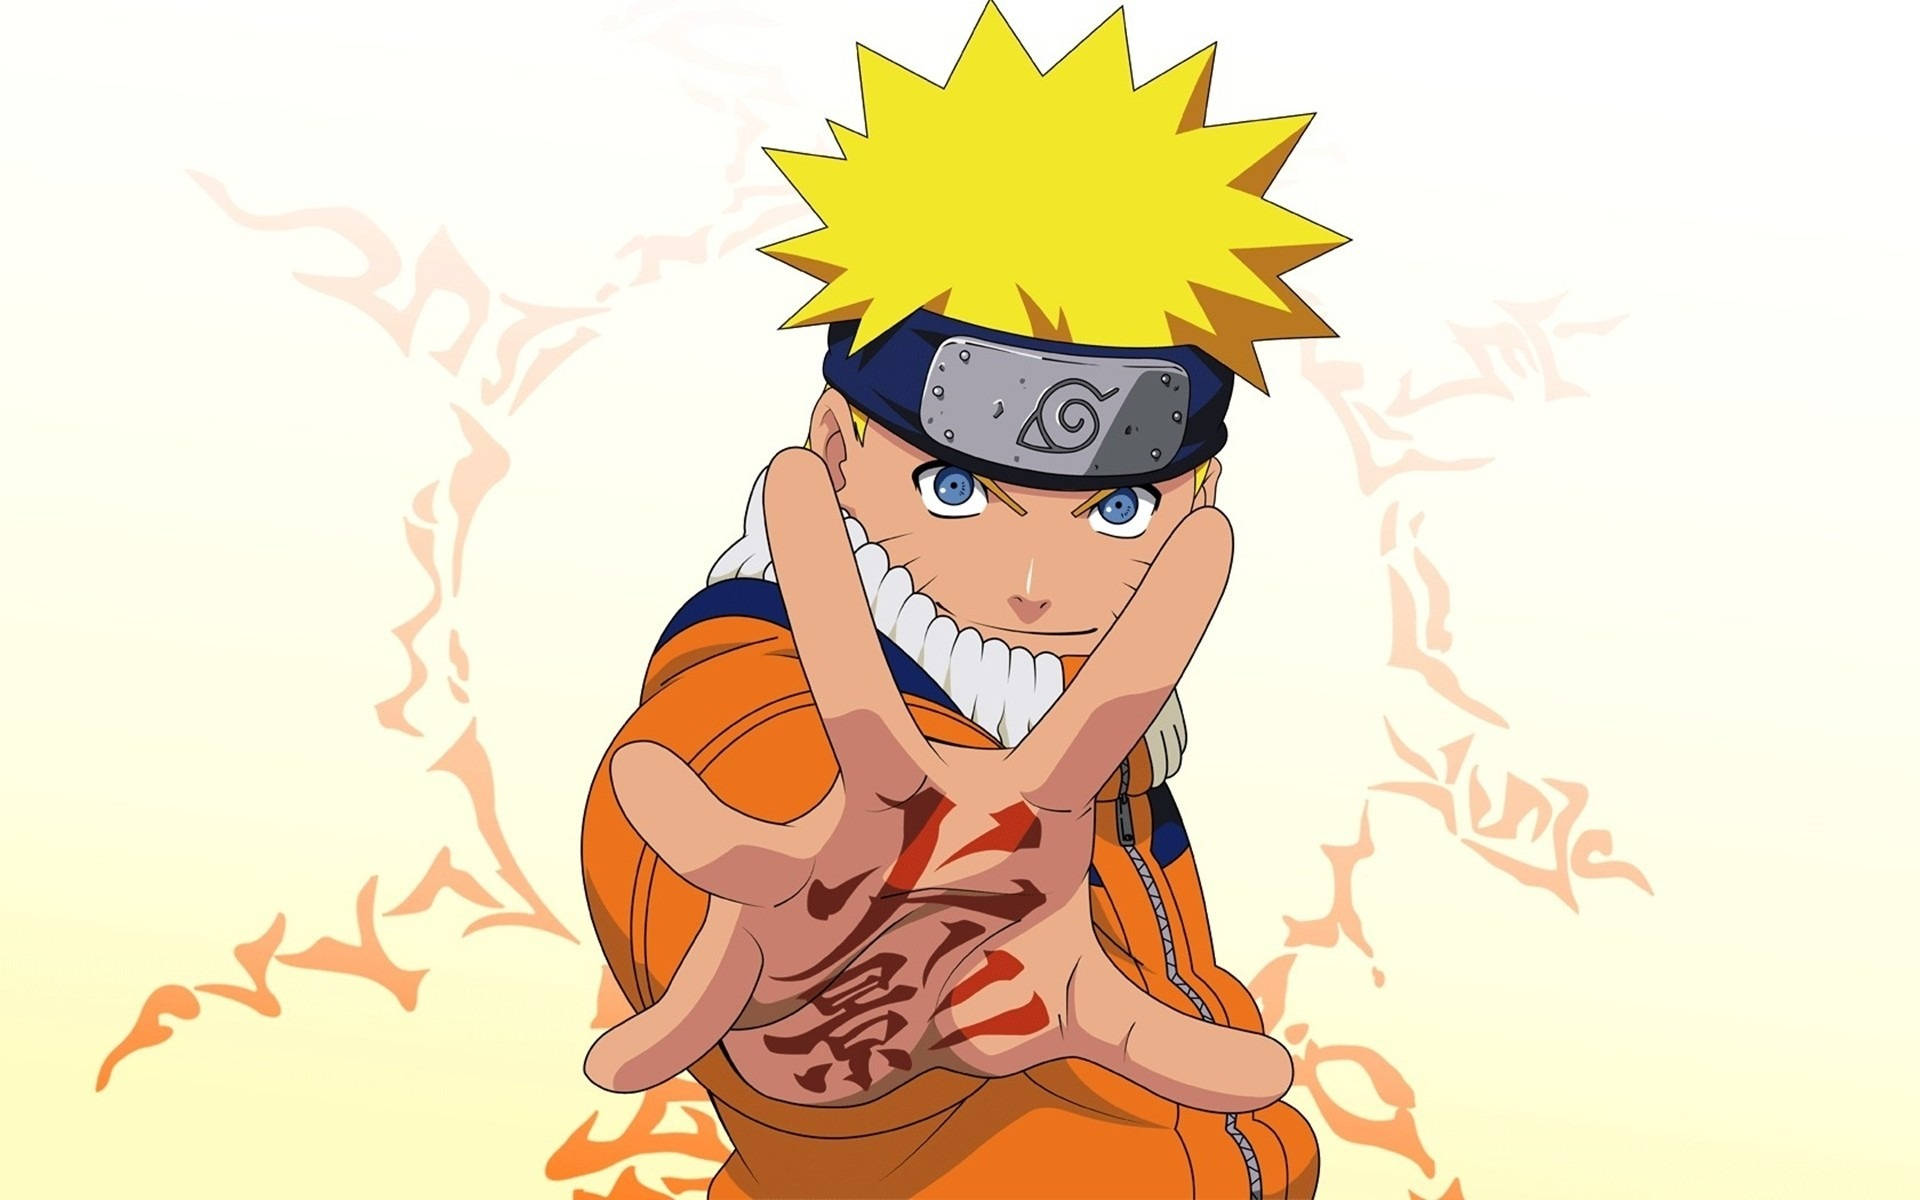 Uzumakinaruto Hd Would Be Translated As Uzumaki Naruto Hd In Swedish. Since It Is A Name And A Technical Term For High Definition Display, It Is Not Necessary To Translate It Into Swedish. However, It Could Be Written As Uzumaki Naruto Högupplöst. Wallpaper